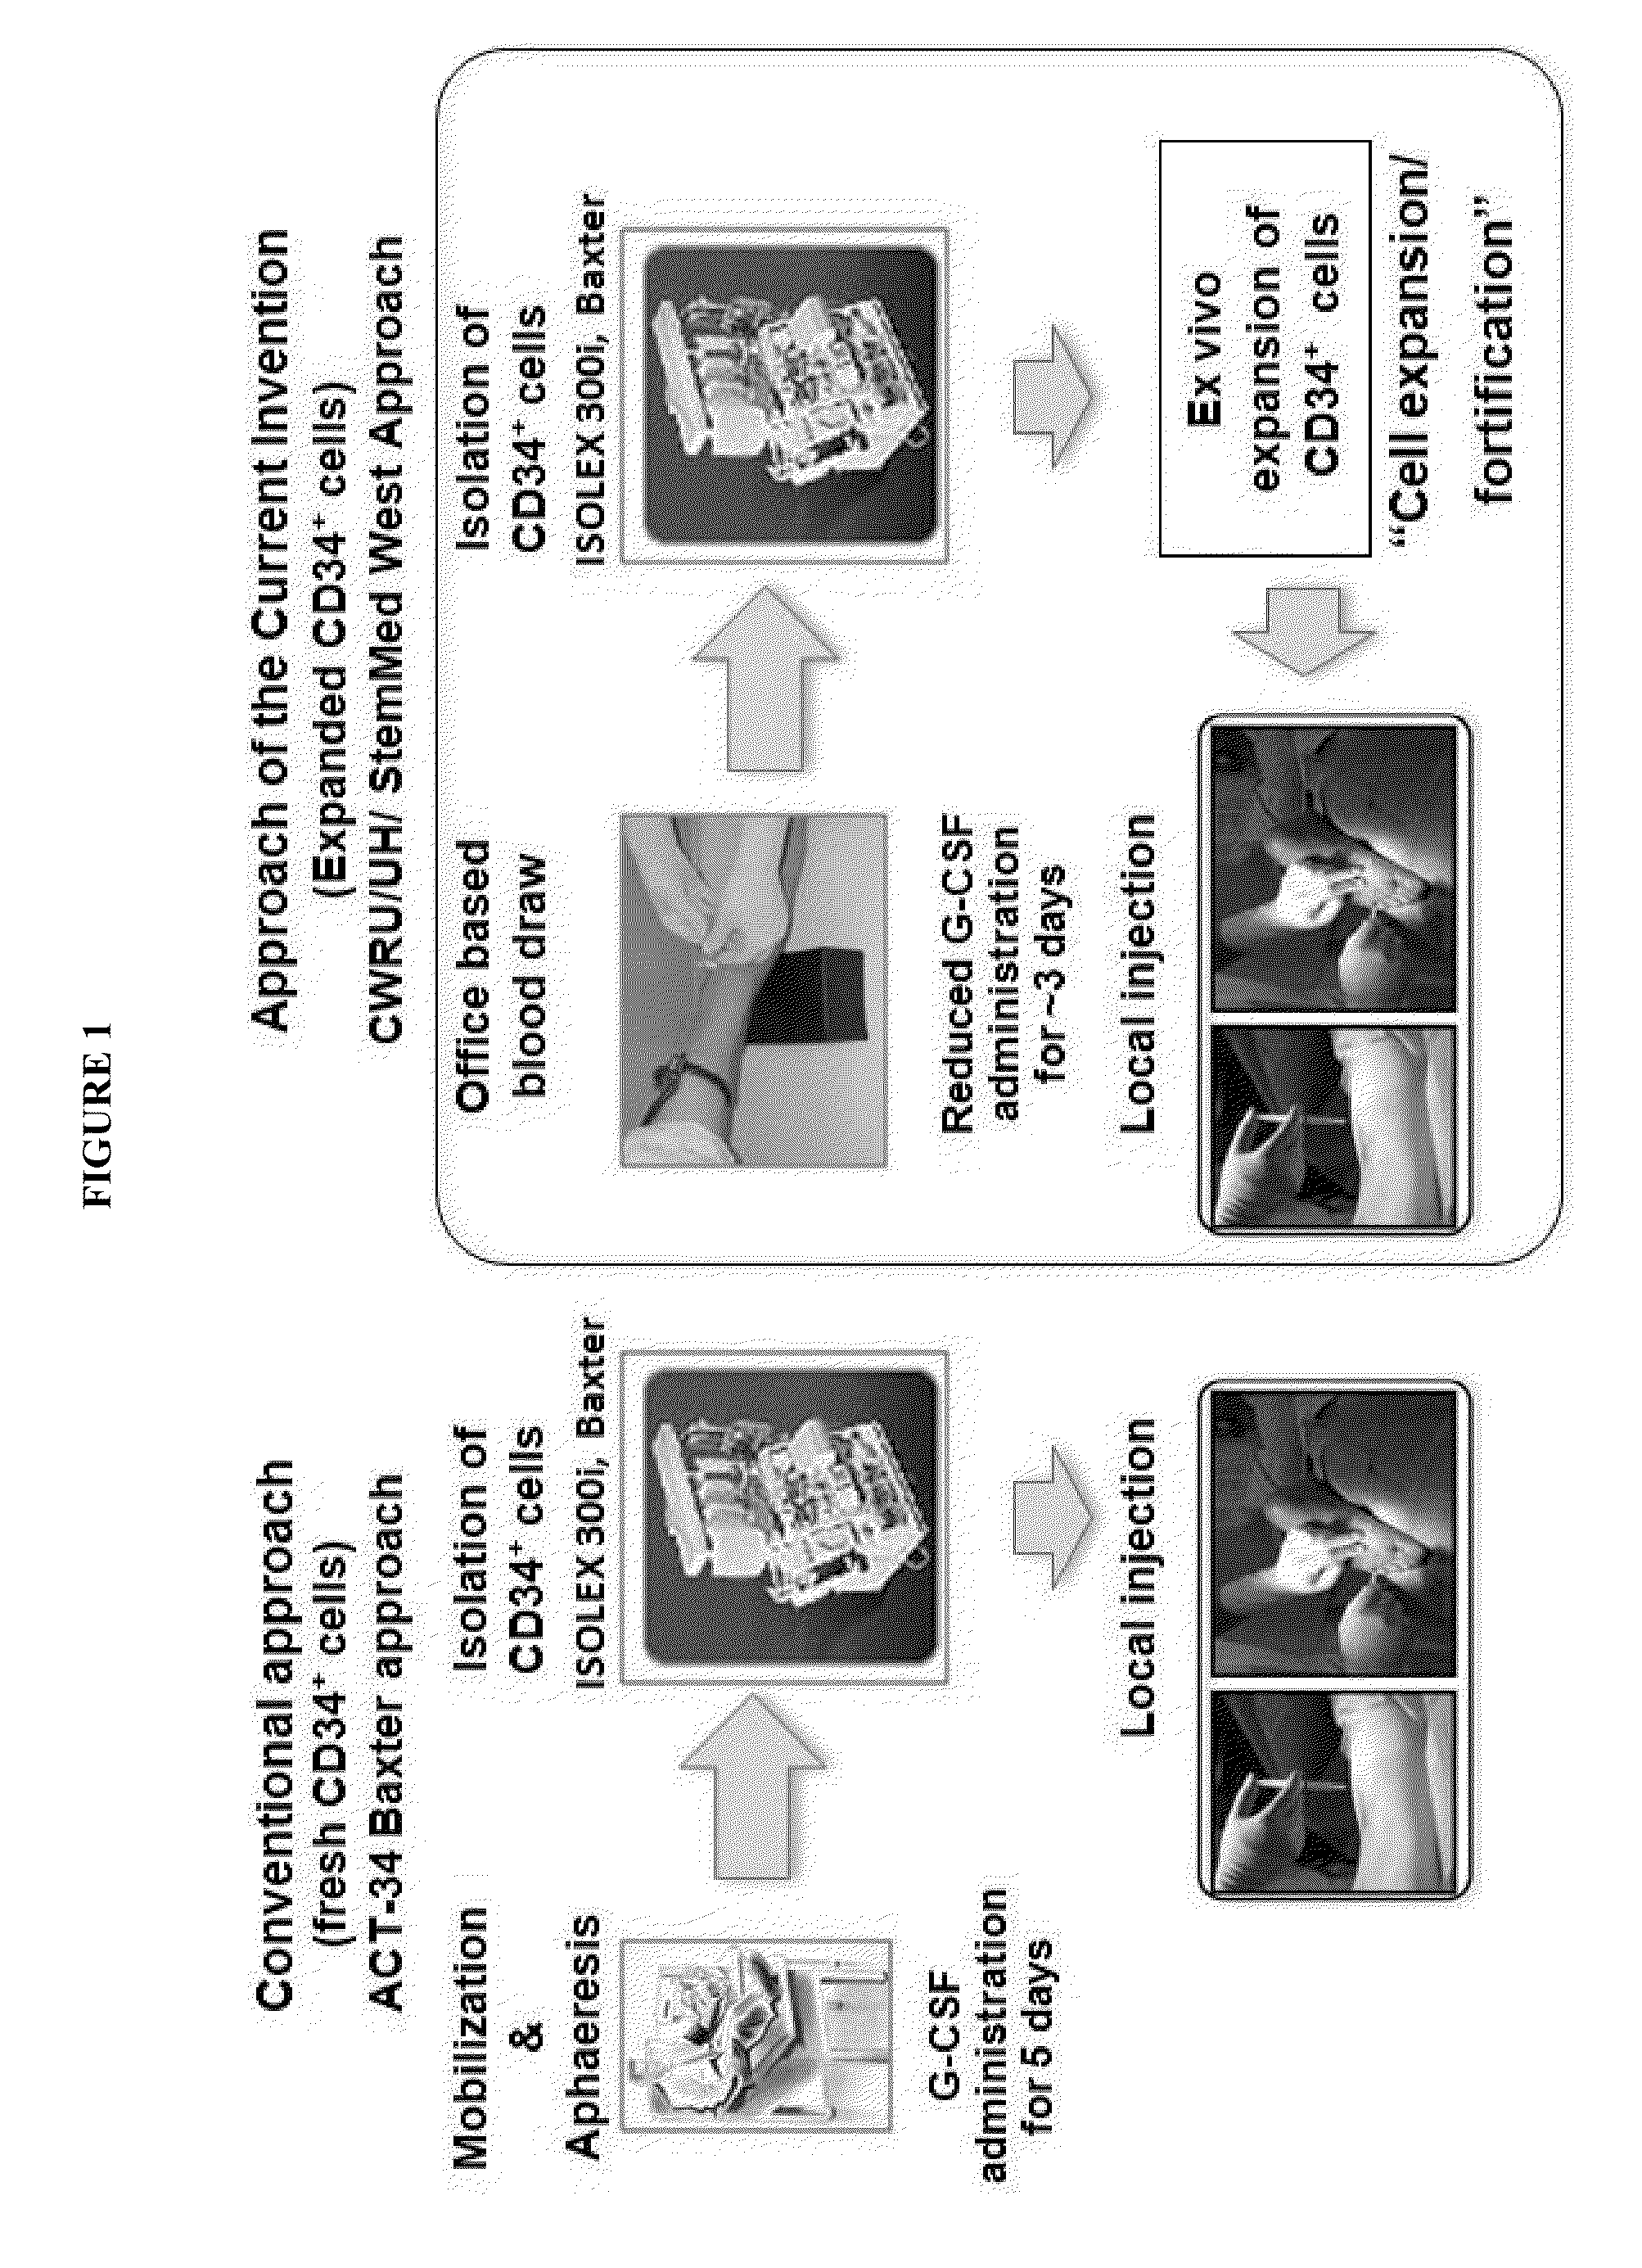 Method For Amplification And Functional Enhancment Of Blood Derived Progenitor Cells Using A Closed Culture System